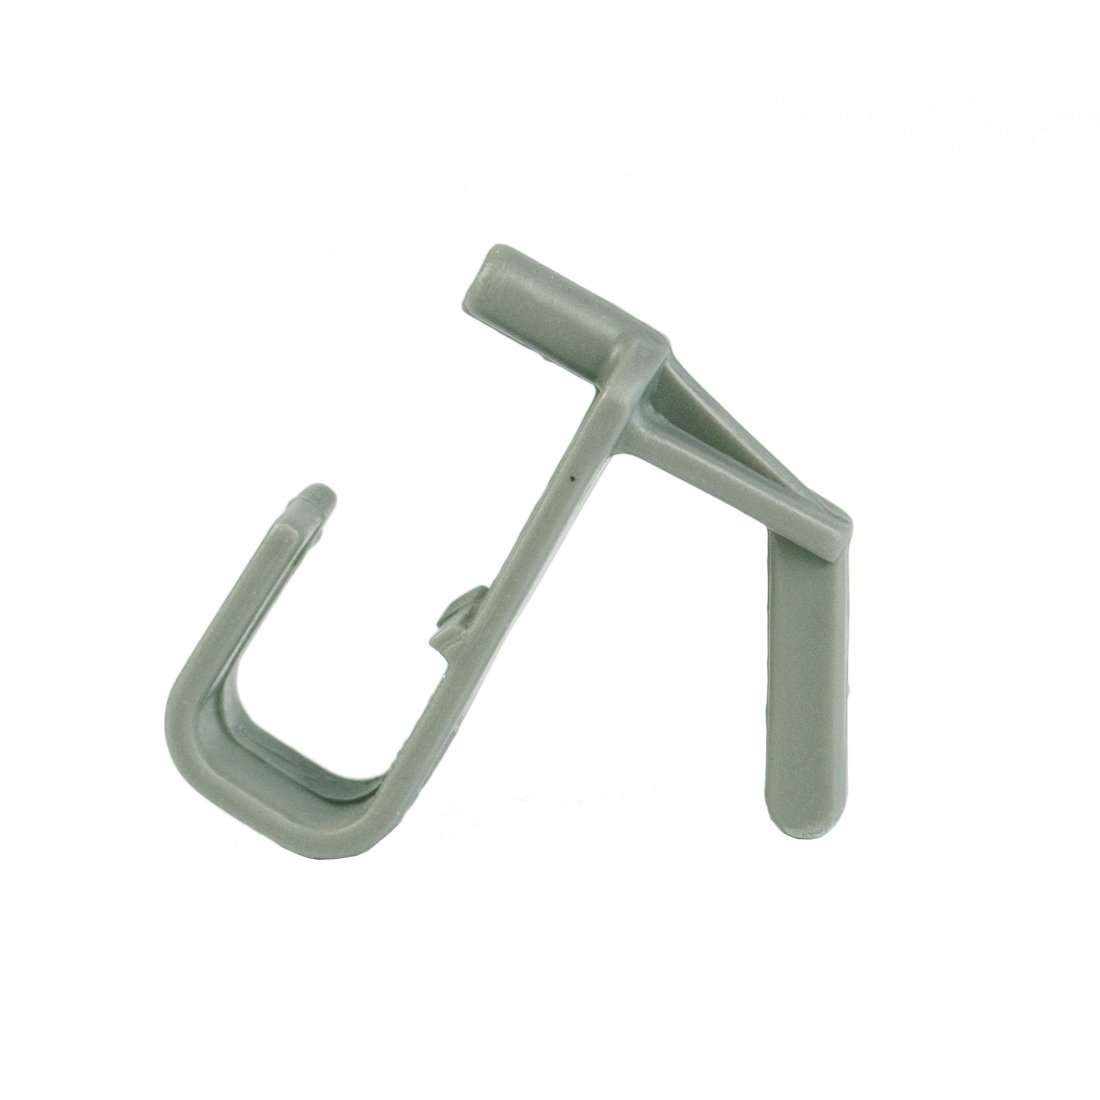 Pulex Small Bucket Clips - Set of Two - Right Side View